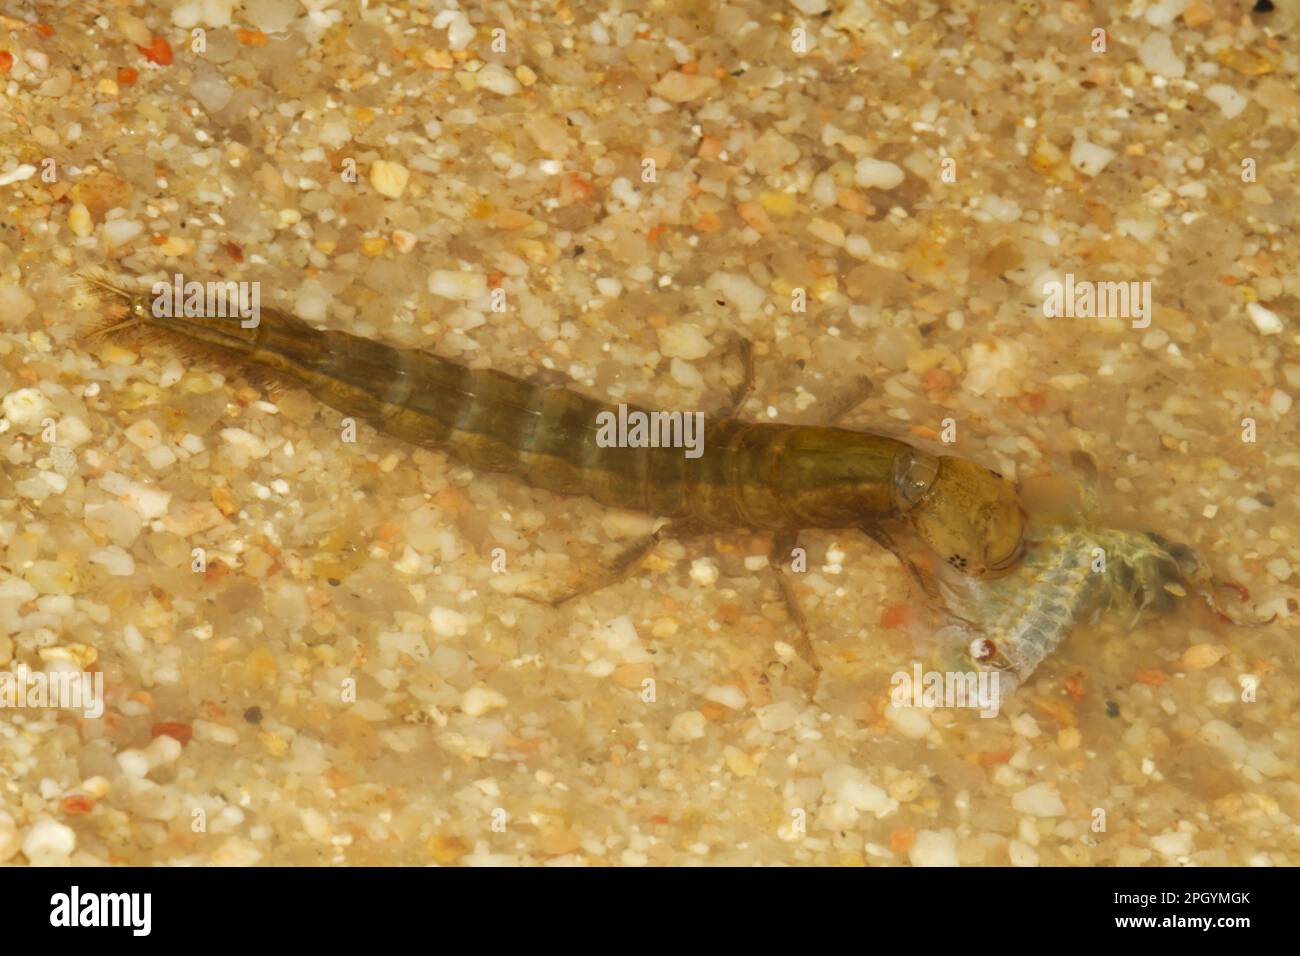 Great diving beetle (Dytiscus marginalis), Other animals, Insects, Beetles, Animals, Great Diving Beetle larva, feeding on fairy shrimp in shallow Stock Photo